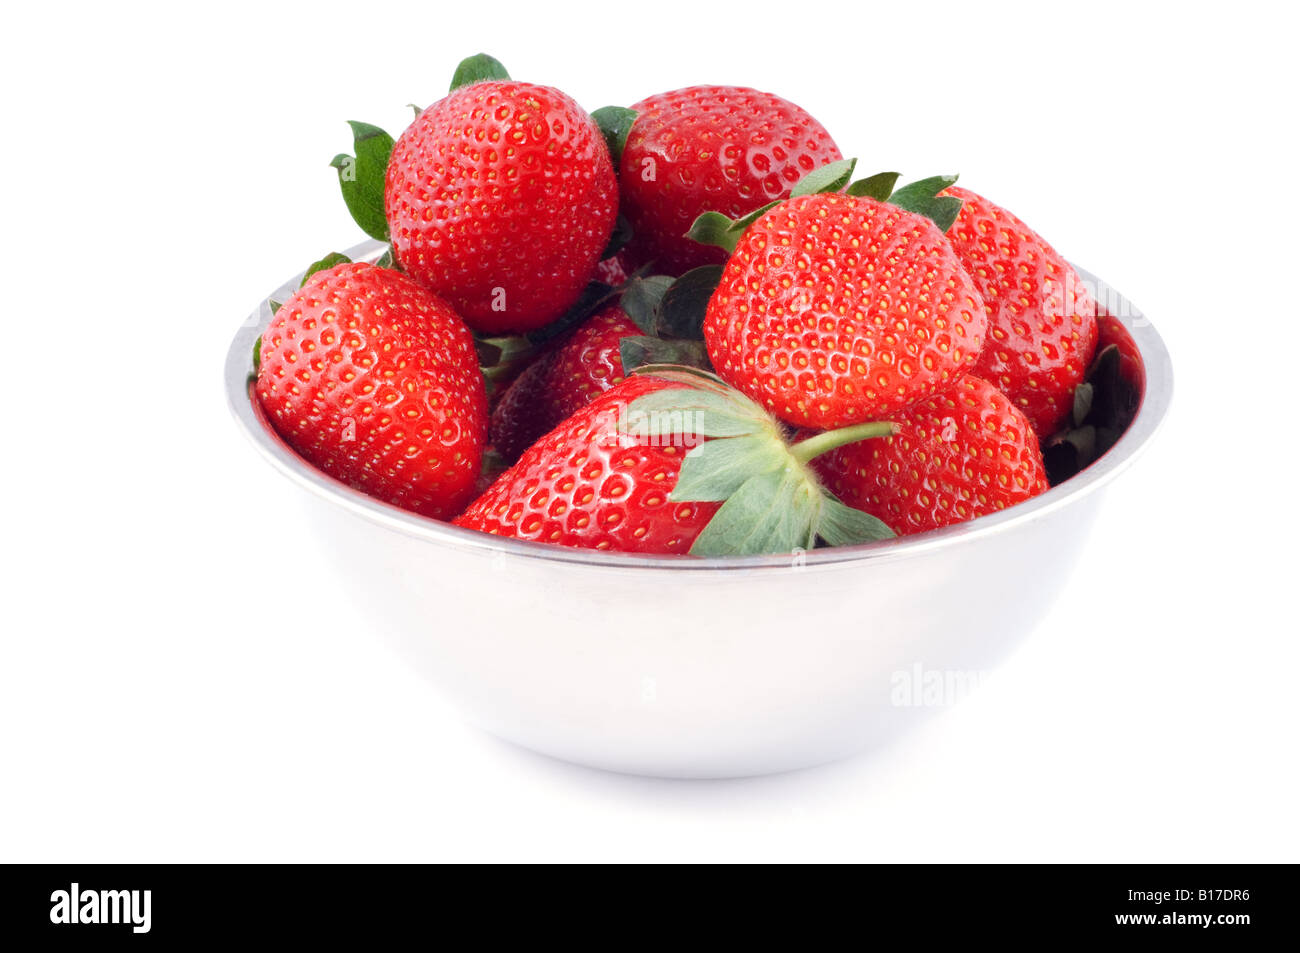 Stainless steel bowl with fresh red strawberries isolated on white background. Stock Photo